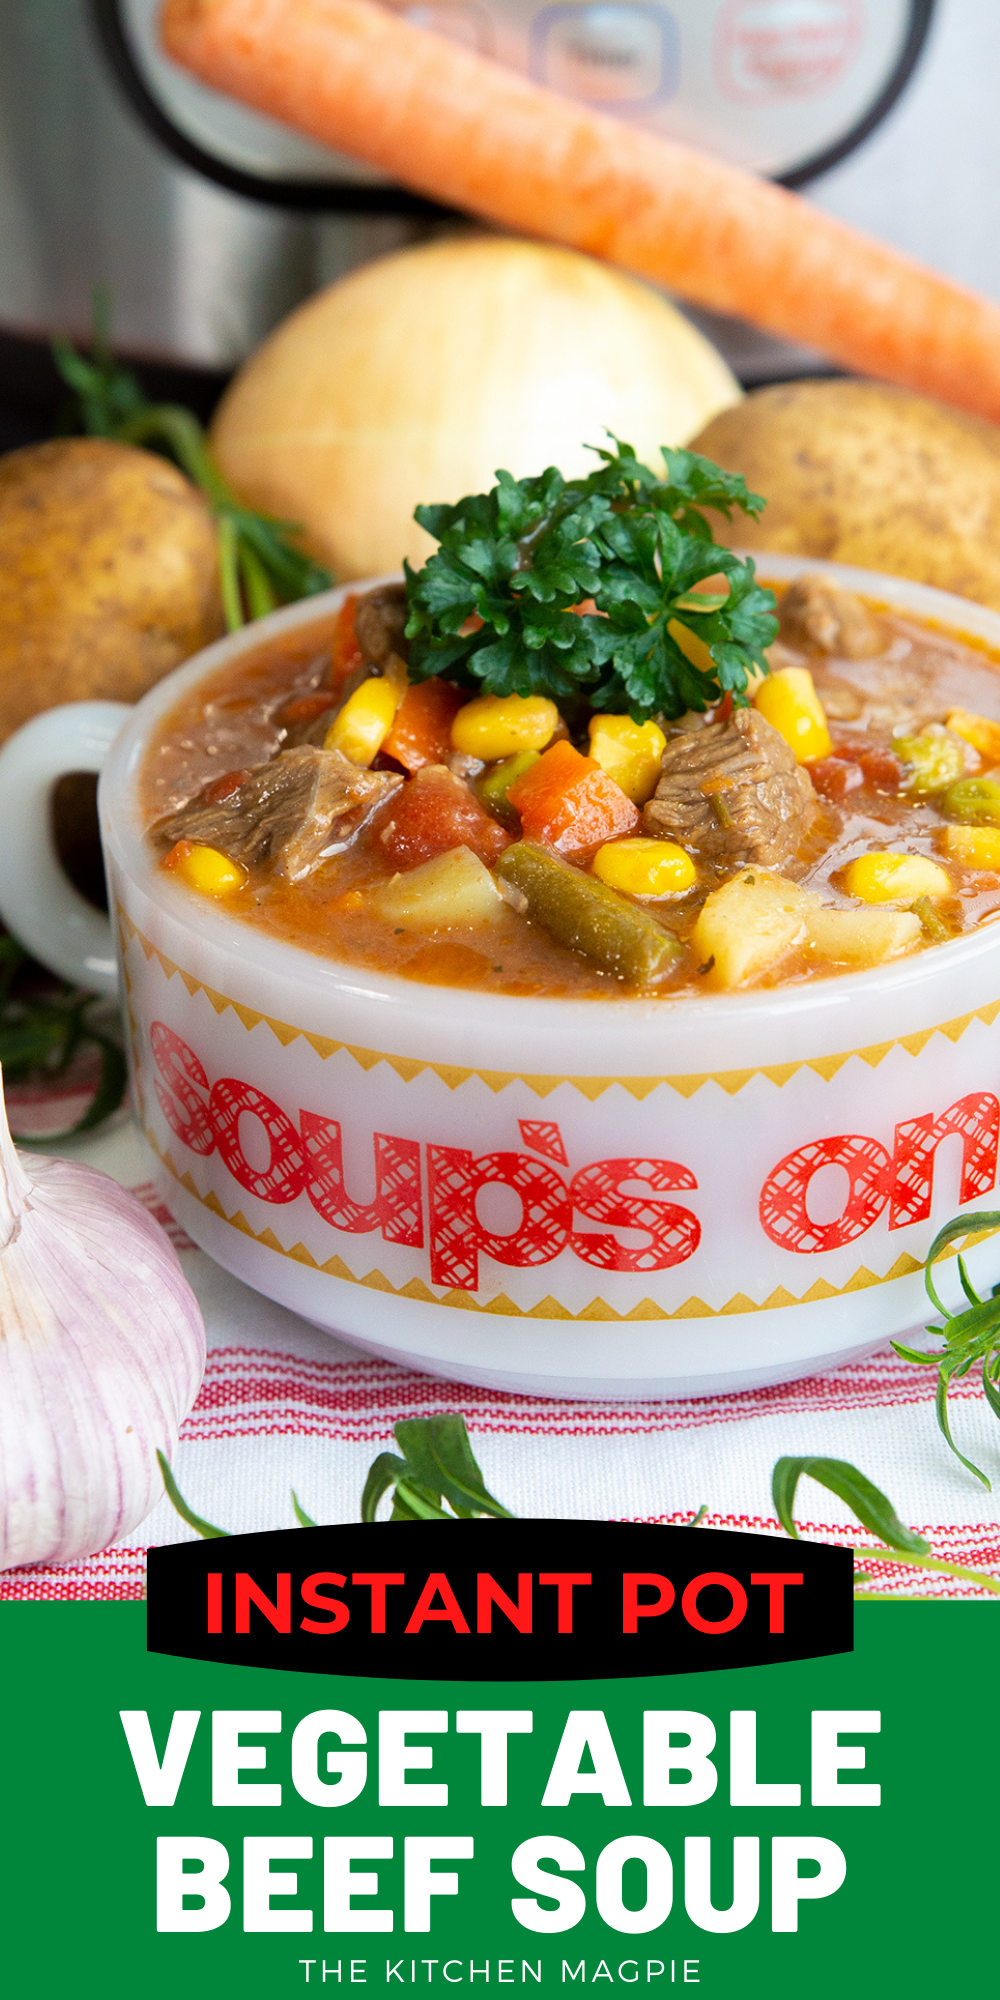 This Instant Pot vegetable beef soup is a delicious, hearty soup that is absolutely a snap to make in your pressure cooker! #instantpot #soup #beefsoup #vegetablesoup